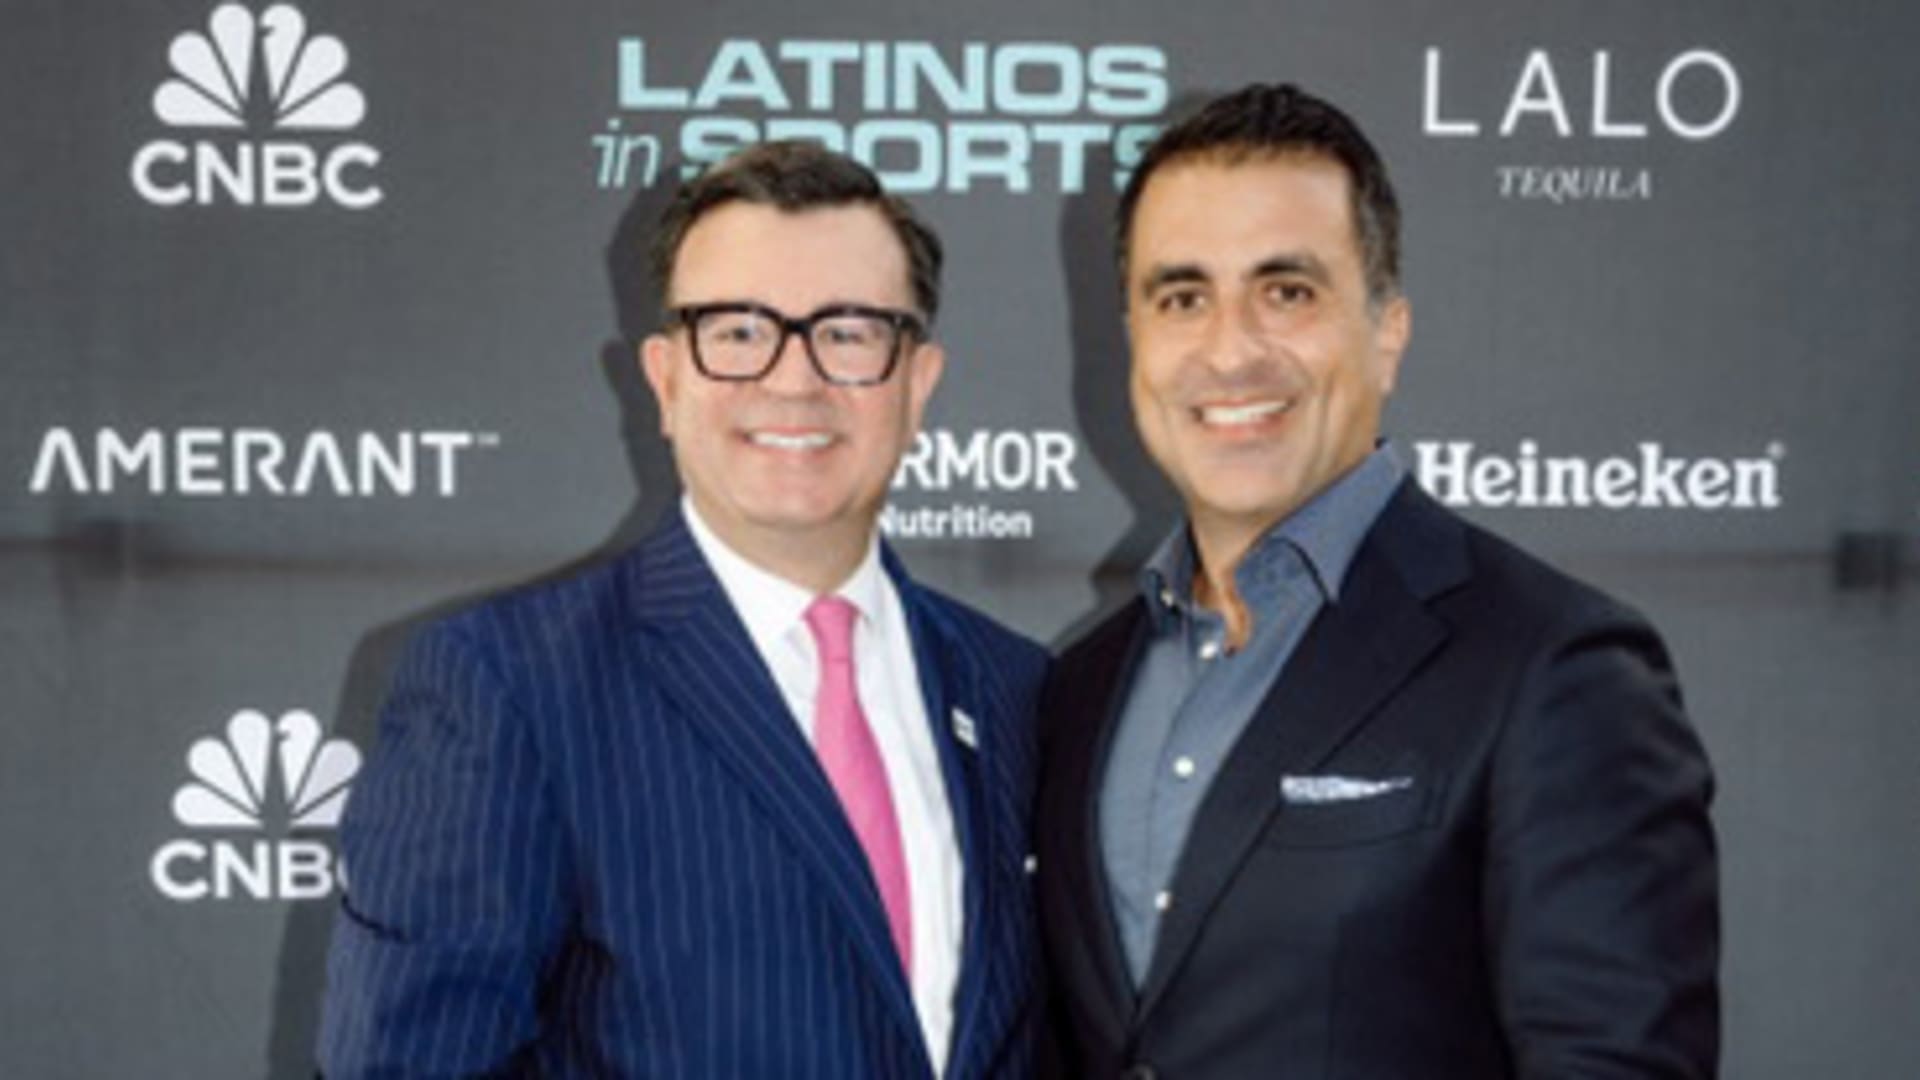 NHL CEO, other Latino executives found Latinos in Sports platform [Video]